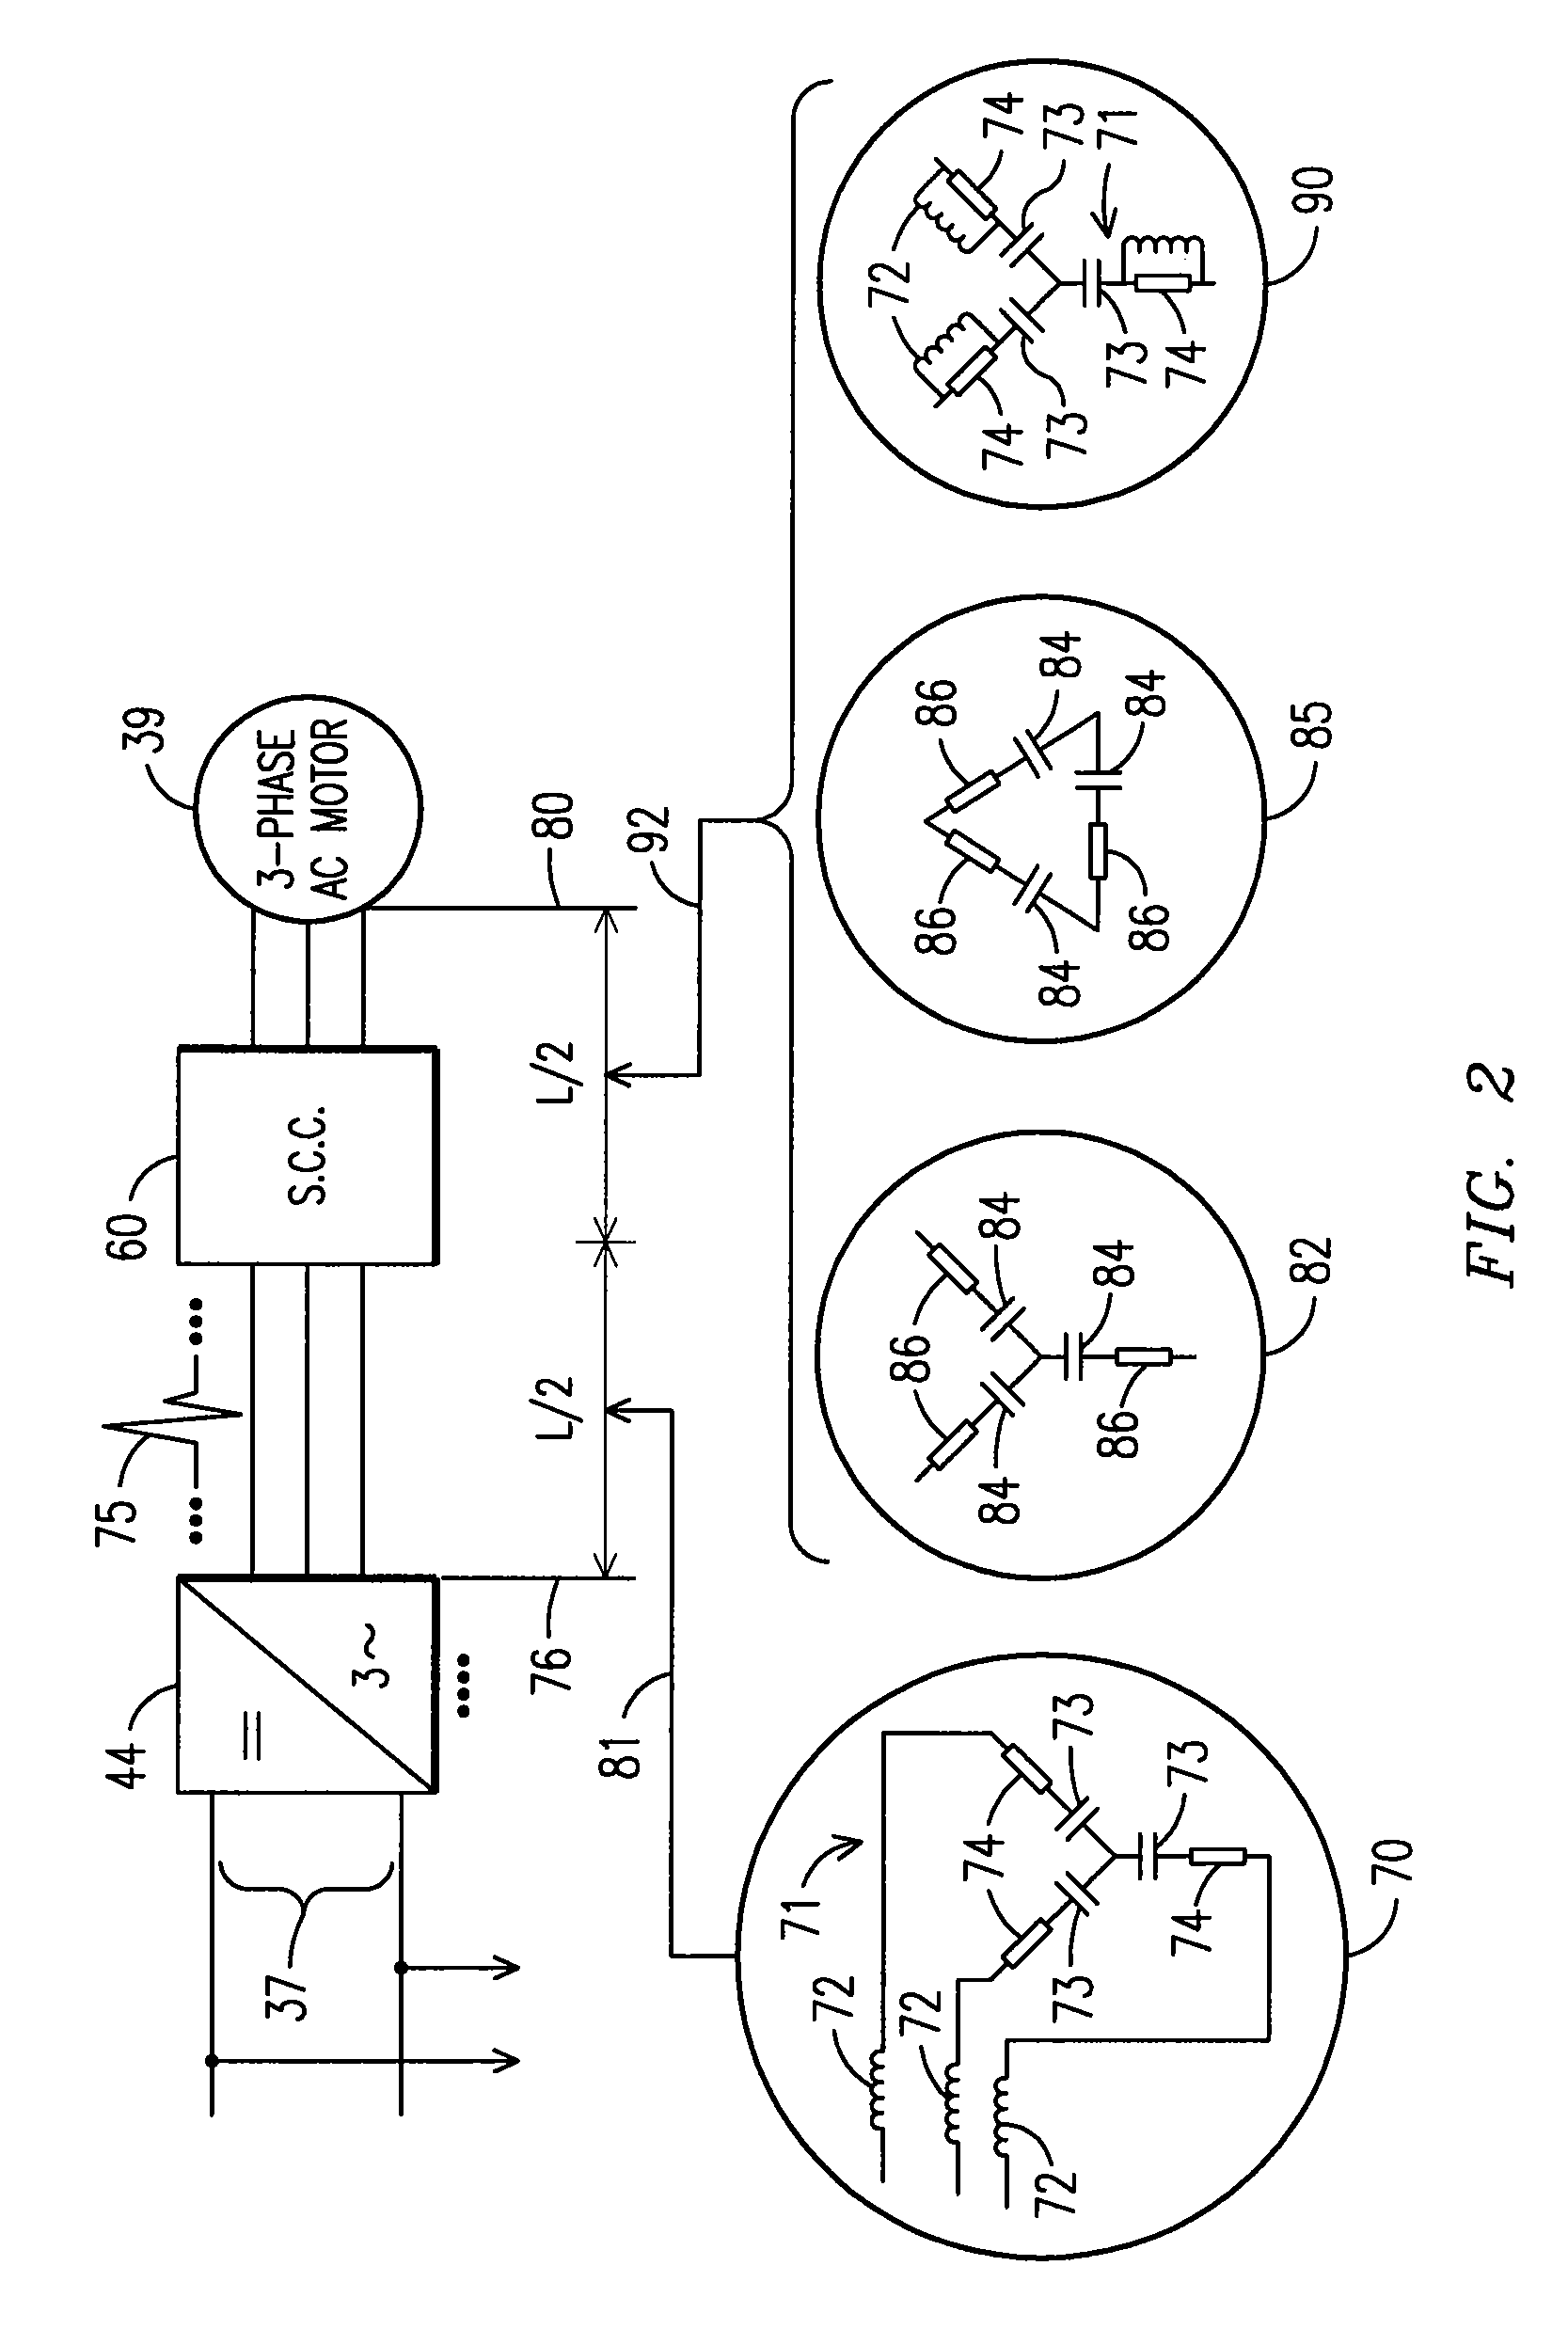 Power system and method for driving an electromotive traction system and auxiliary equipment through a common power bus